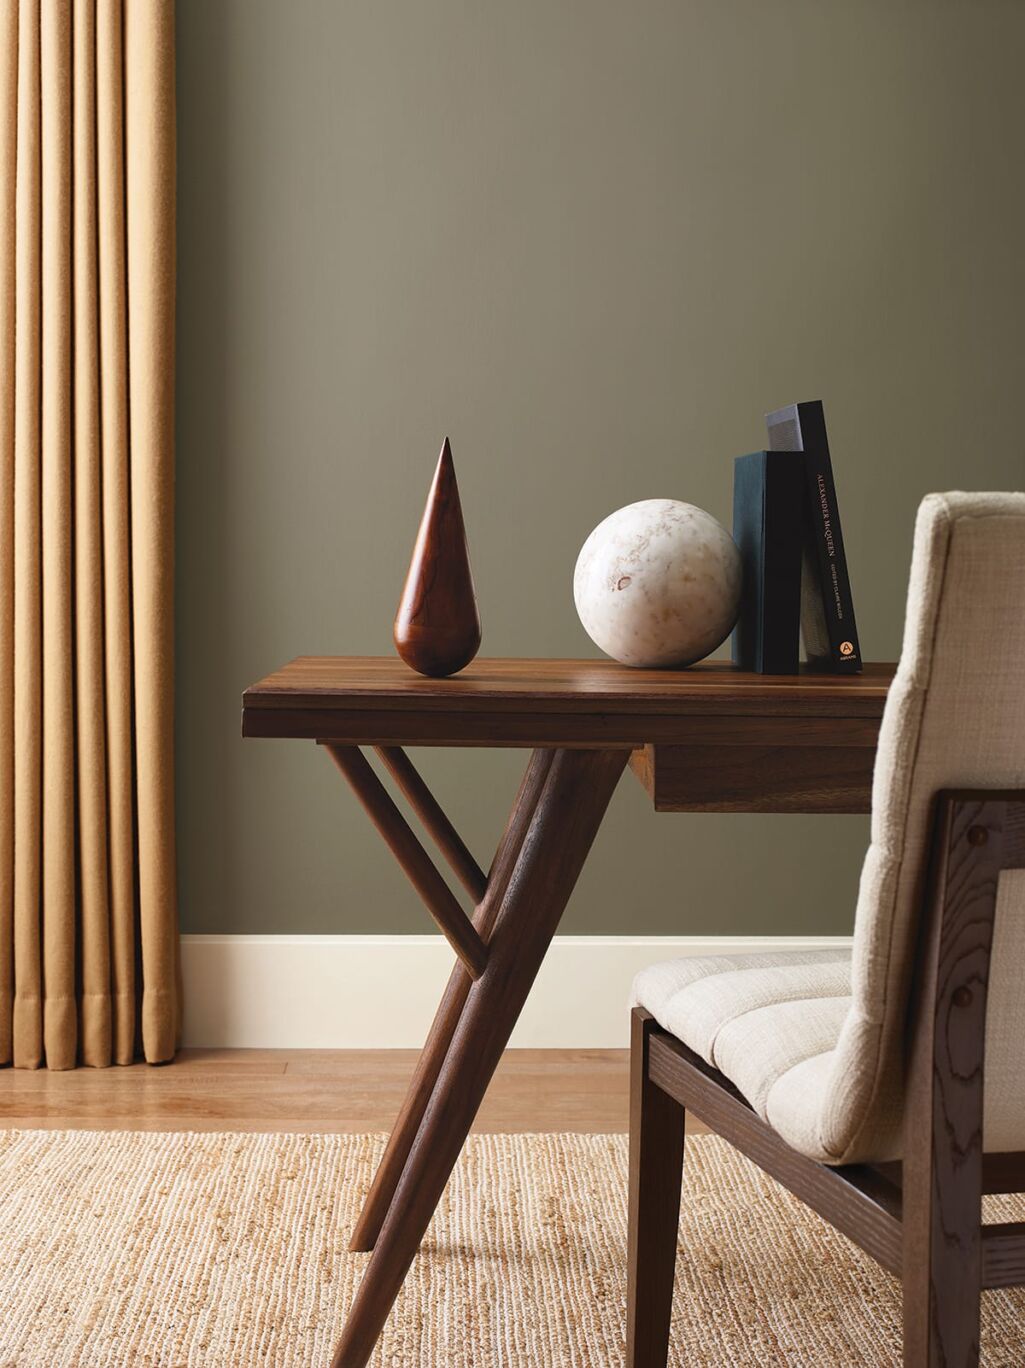 Emerald Designer Edition Color Collection from Sherwin Williams